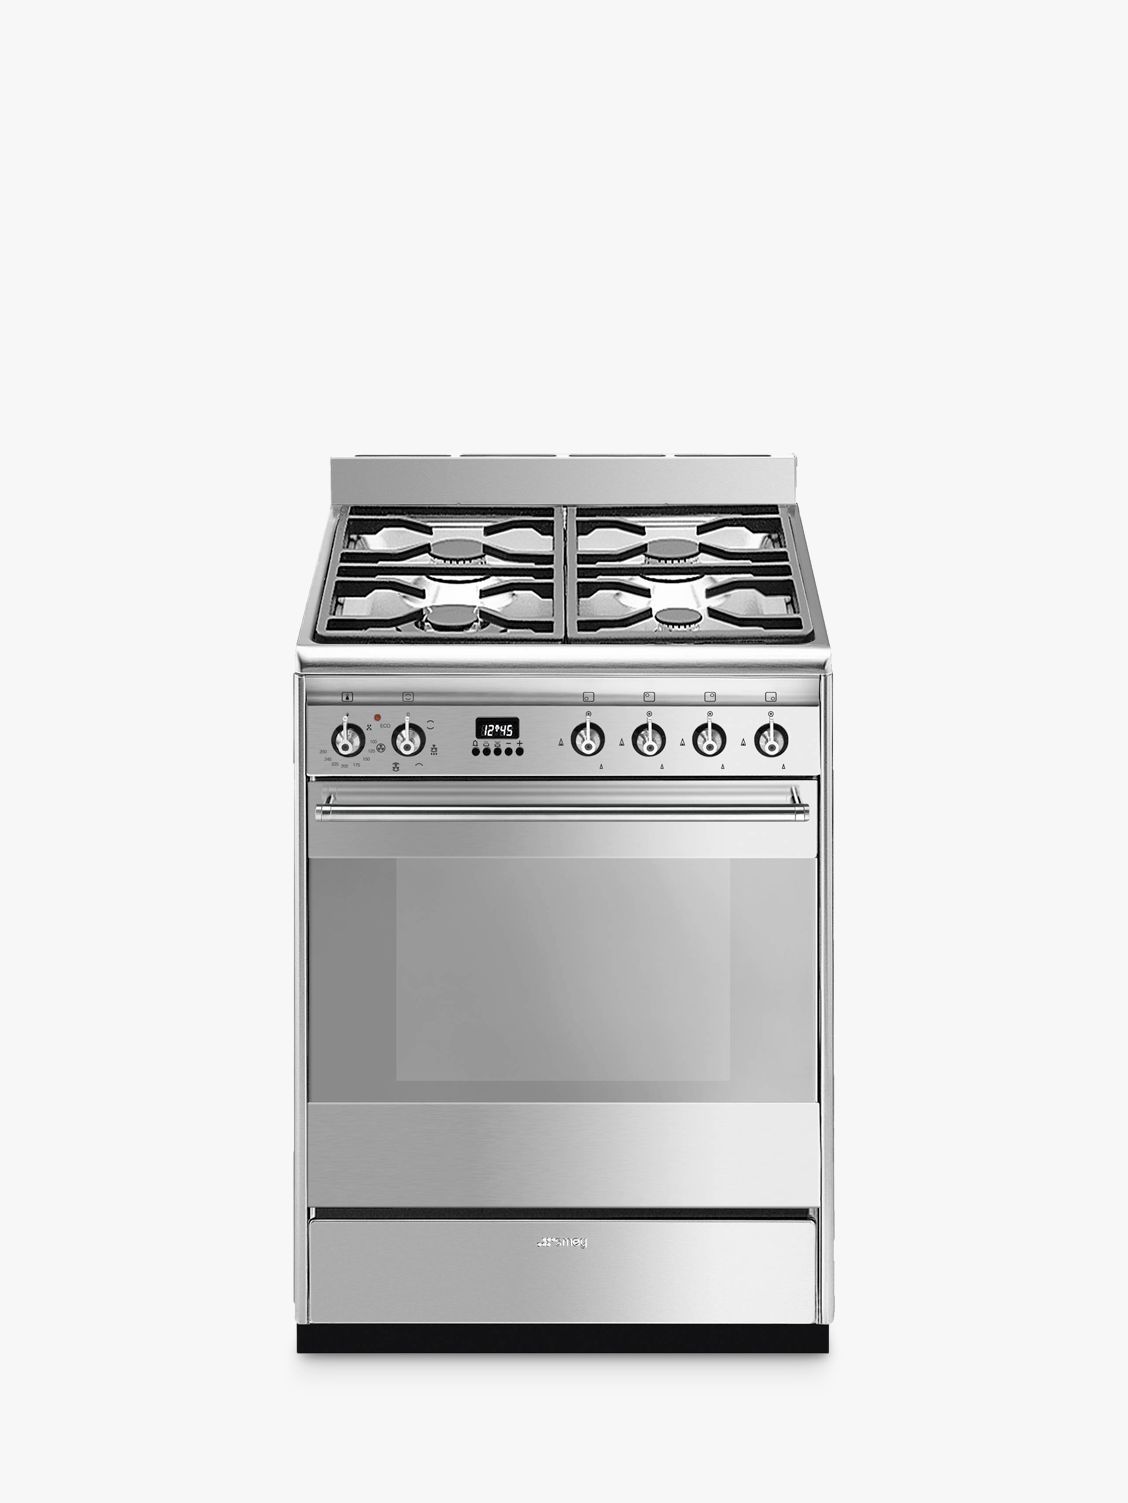 double oven cookers freestanding